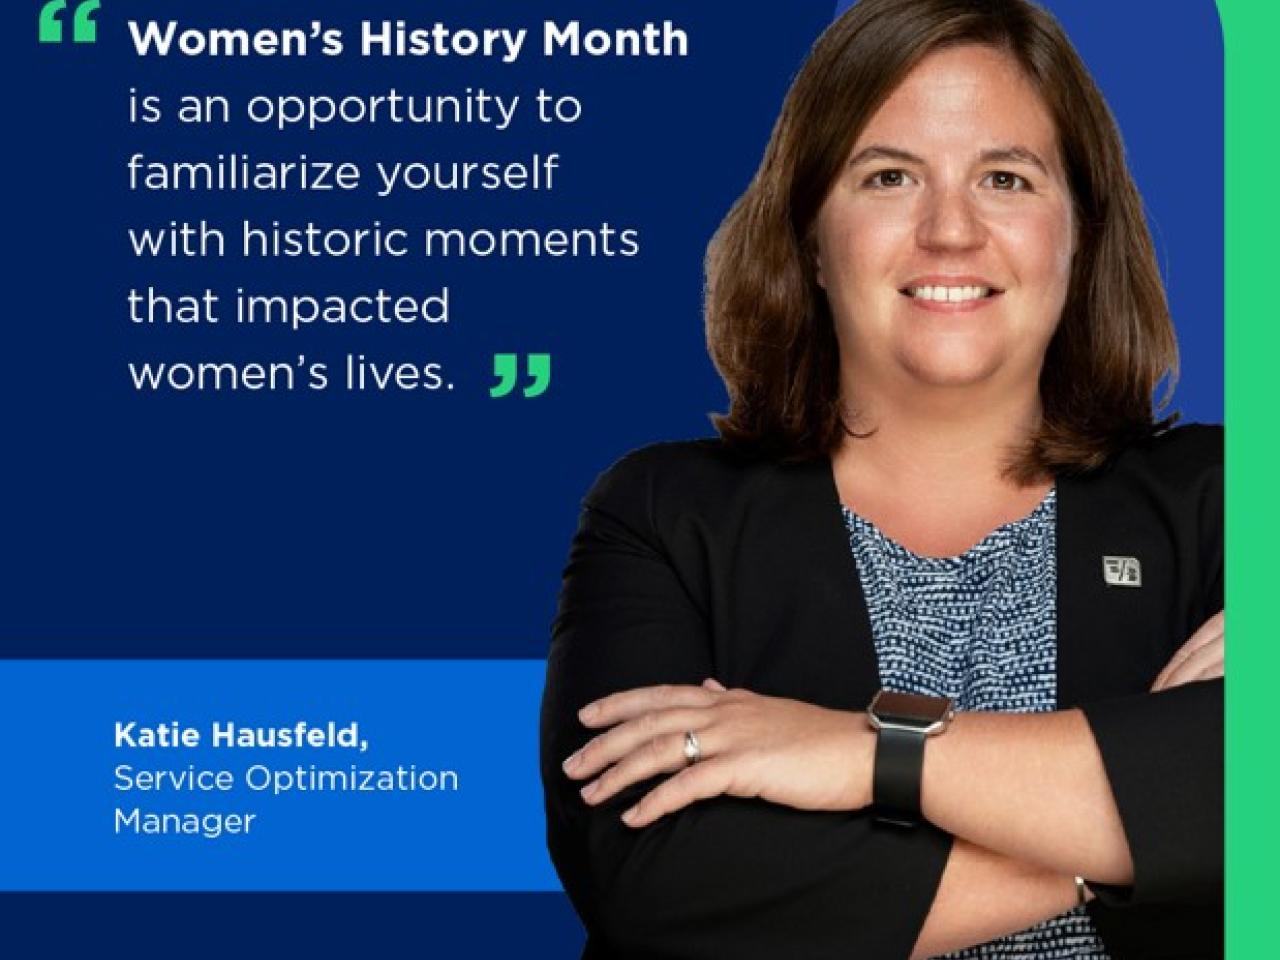 Katie Hausfeld and quote. Women’s History Month is a great opportunity to familiarize yourself with historic moments that impacted women’s lives."